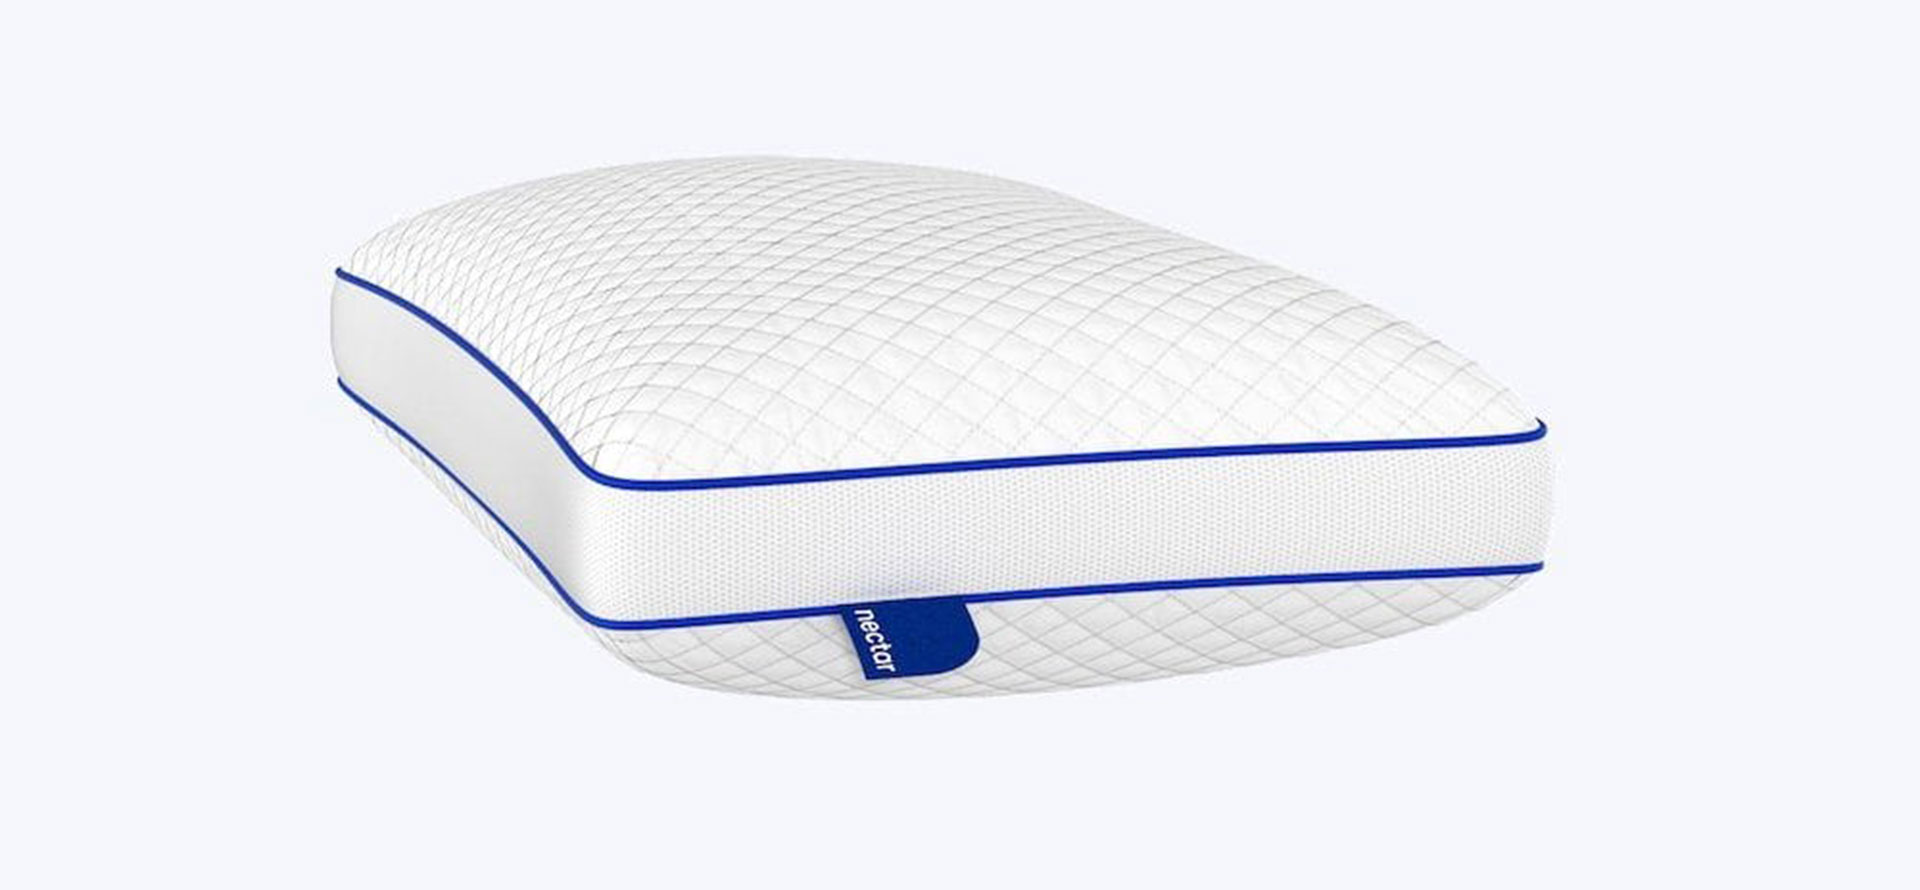 Nectar pillow review.